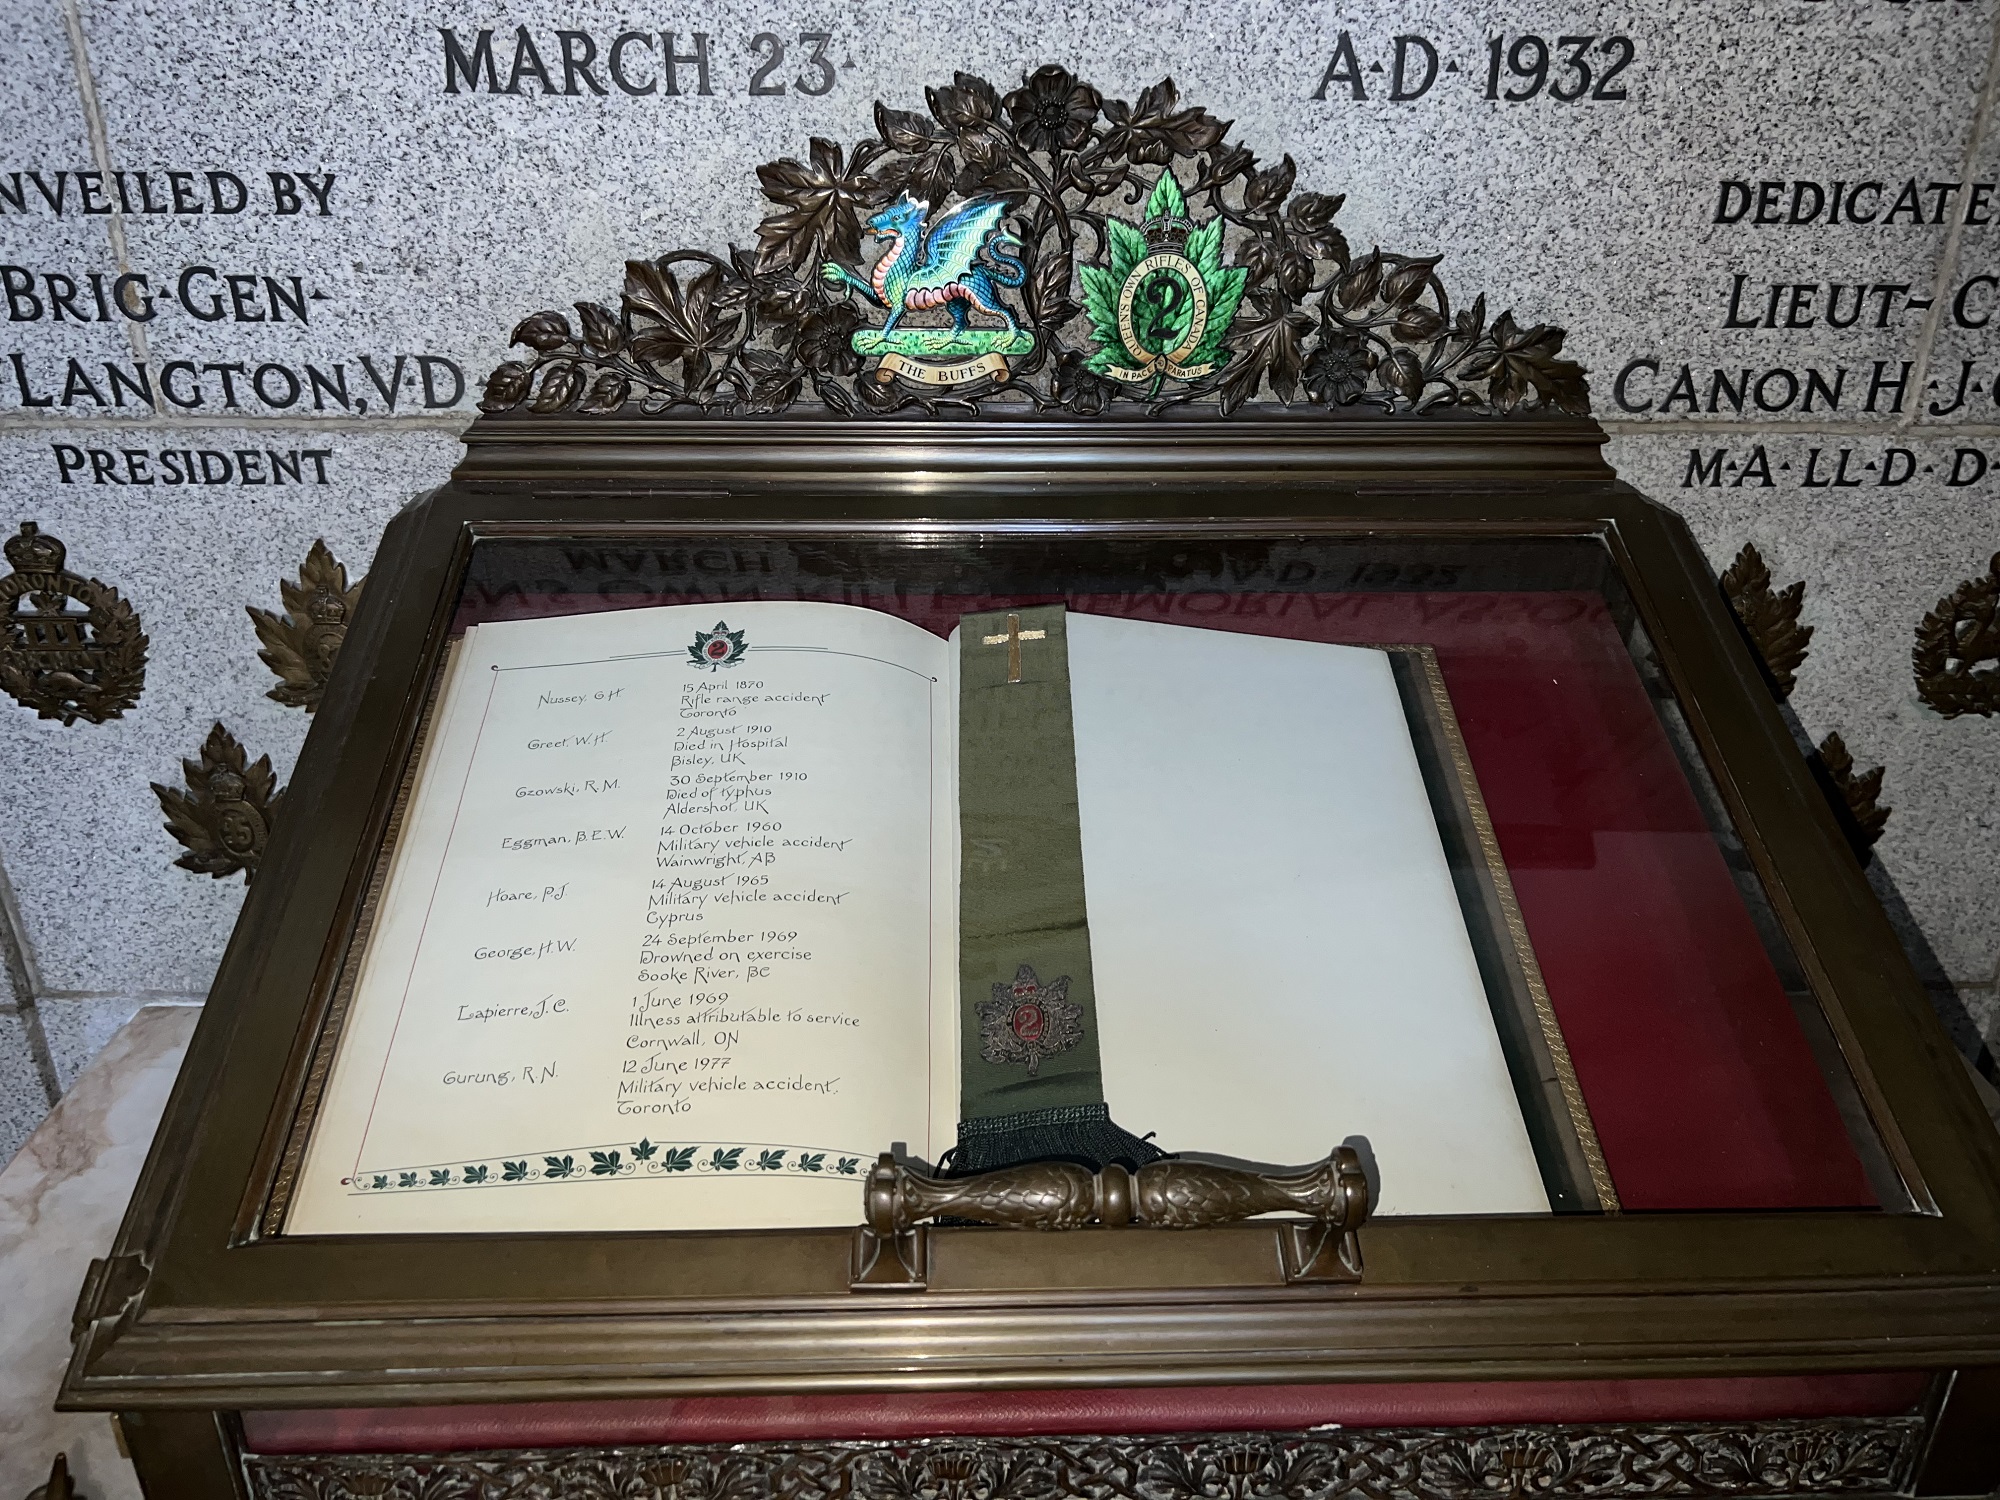 Book of Remembrance in glass and brass case.